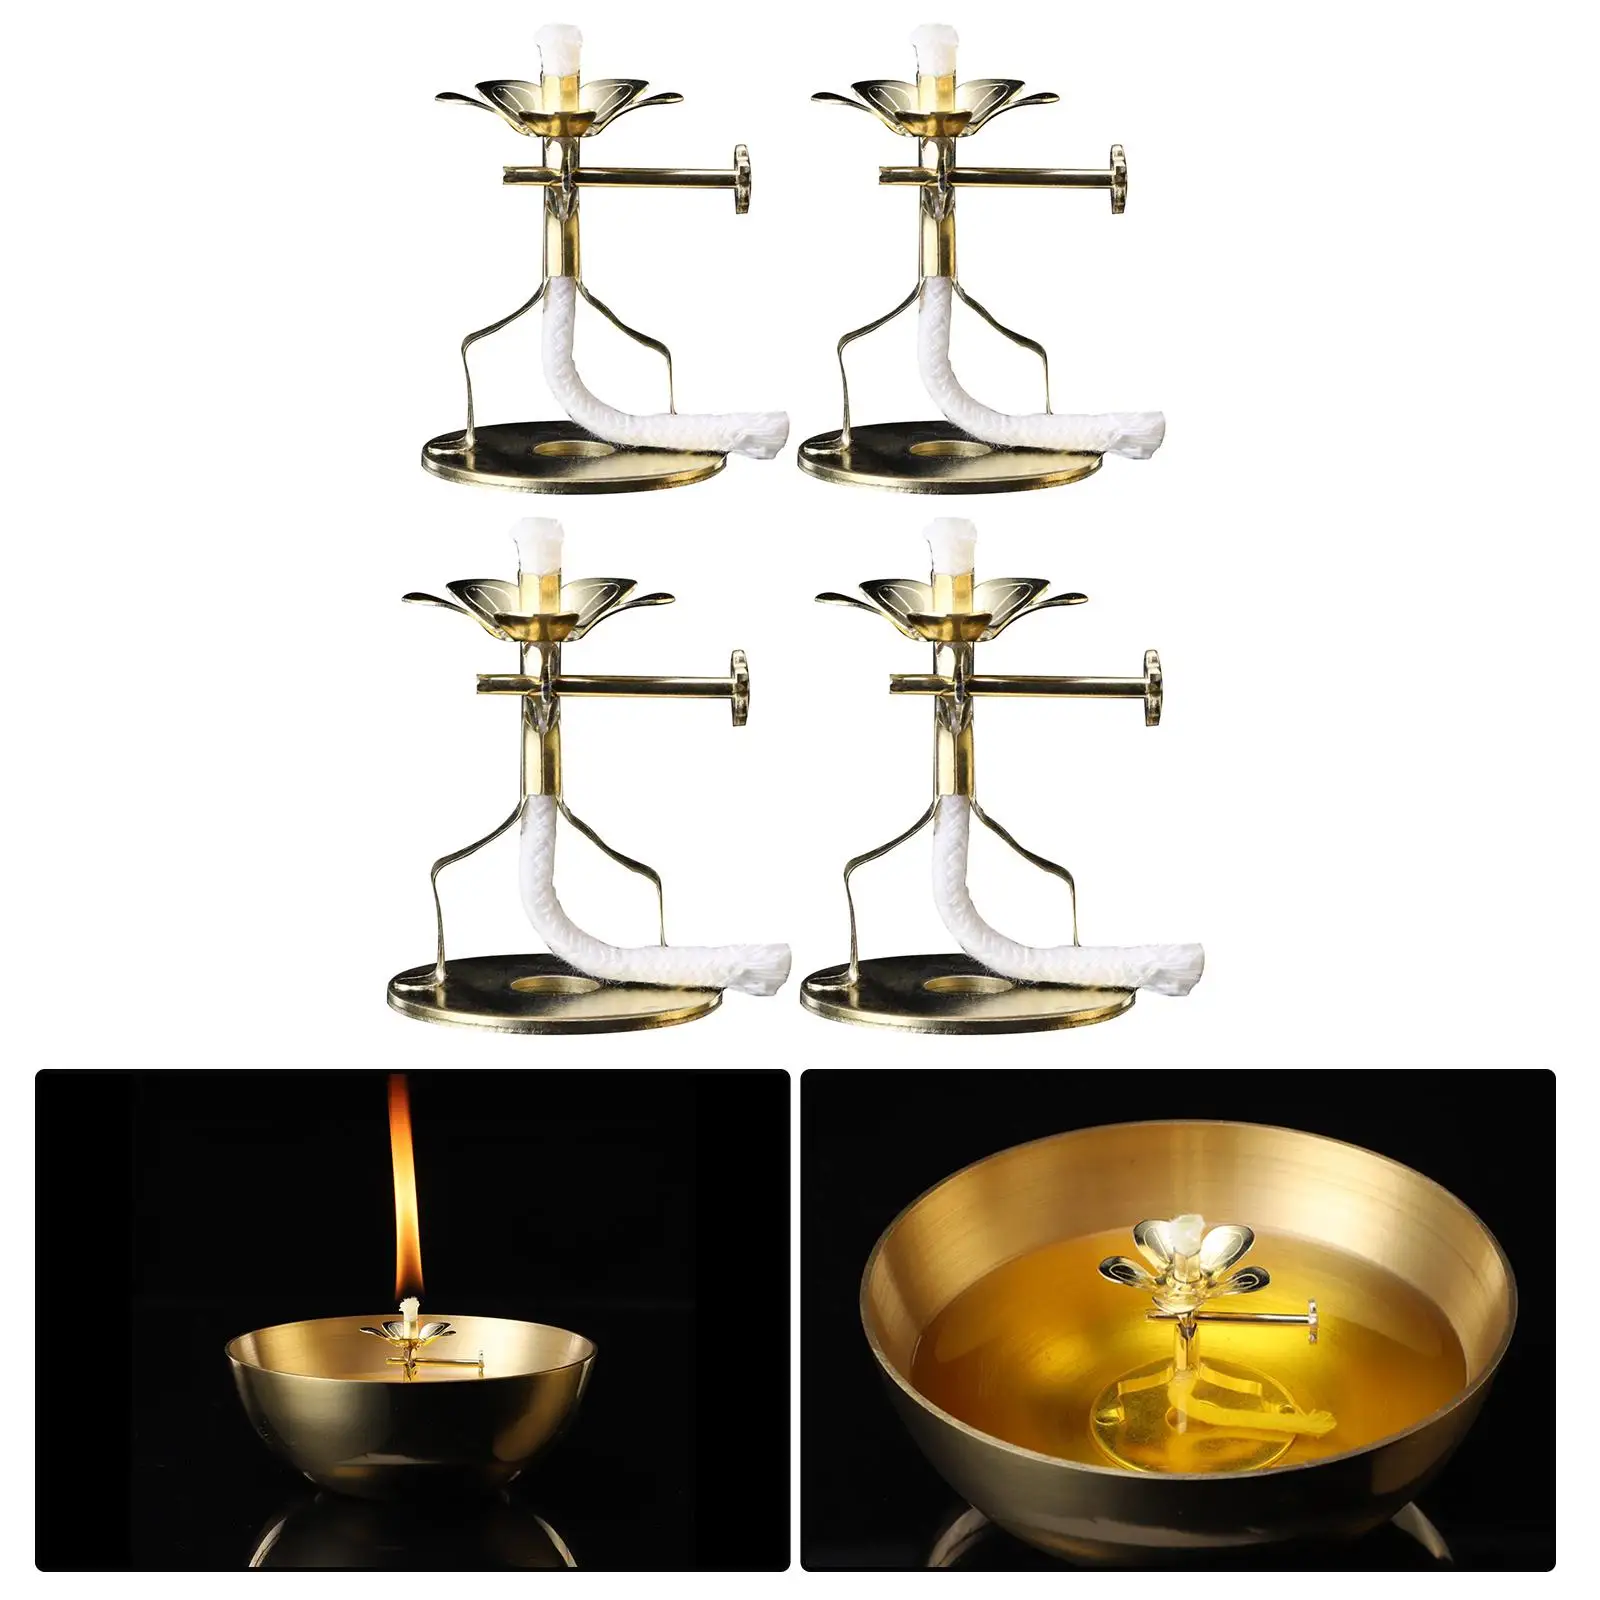  Lamp Wick Holder Wick Lamp Stand Adjustable Tealight Oil Lamp Stand Buddha Ghee Lamp Holder for Party Christmas